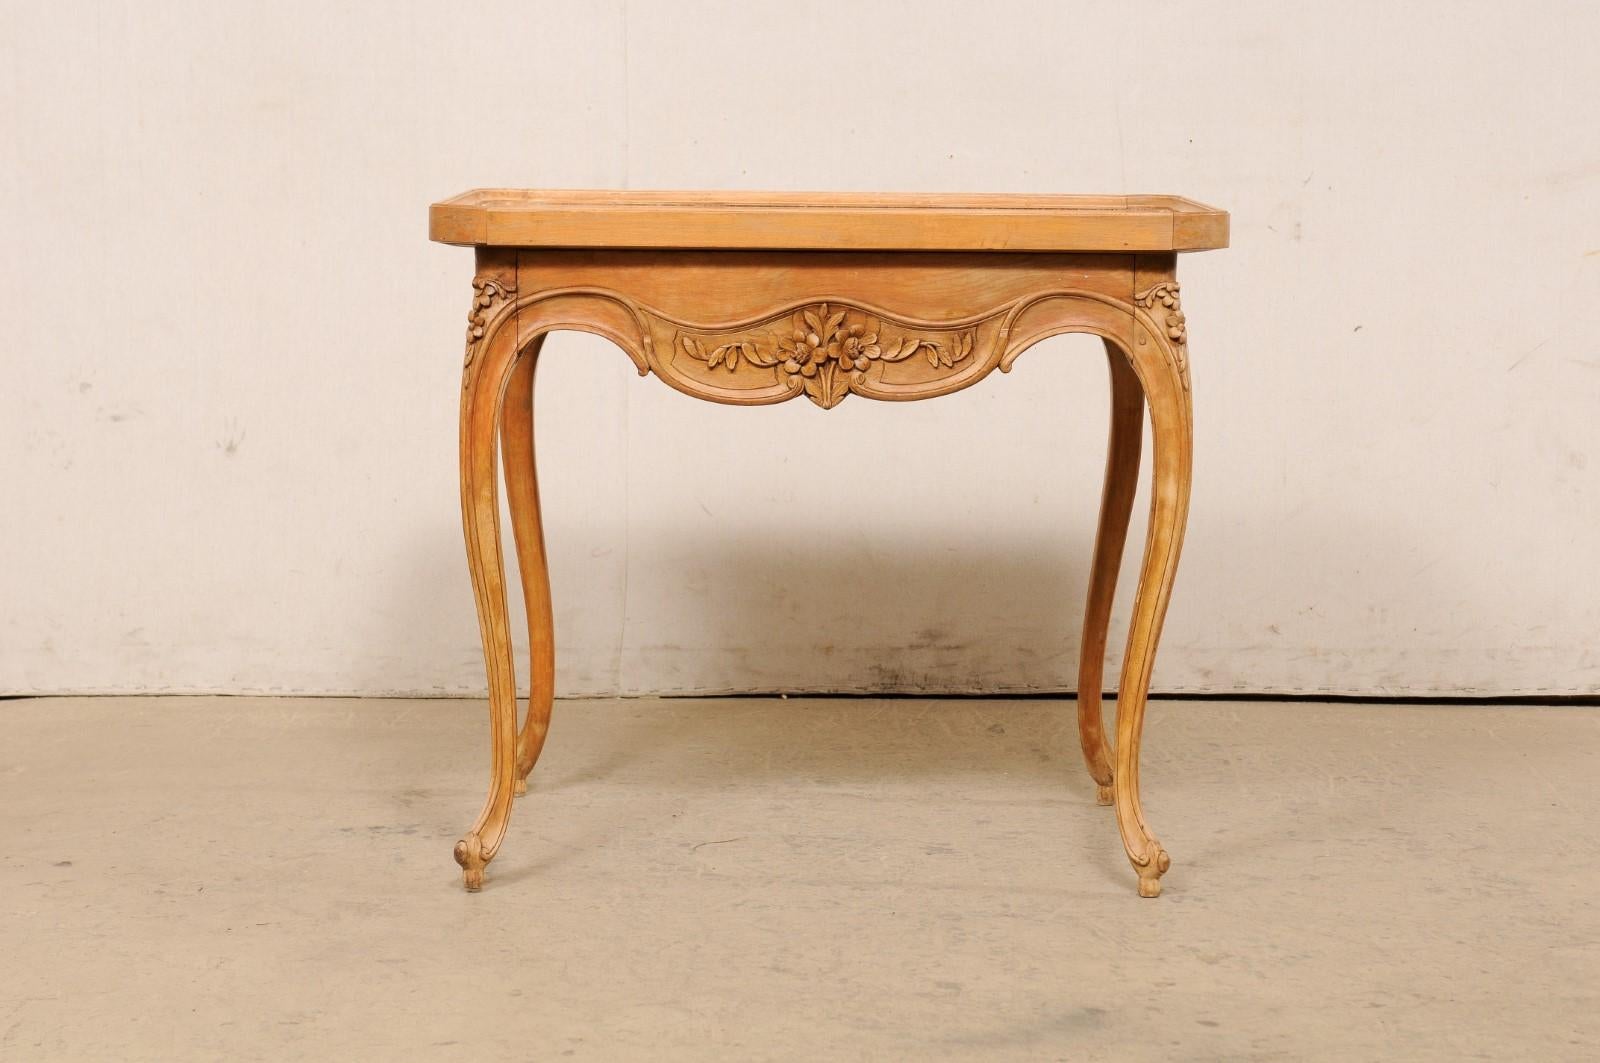 Late 18th Century French Marble-Top Carved-Wood Occasional Table with Drawer For Sale 9